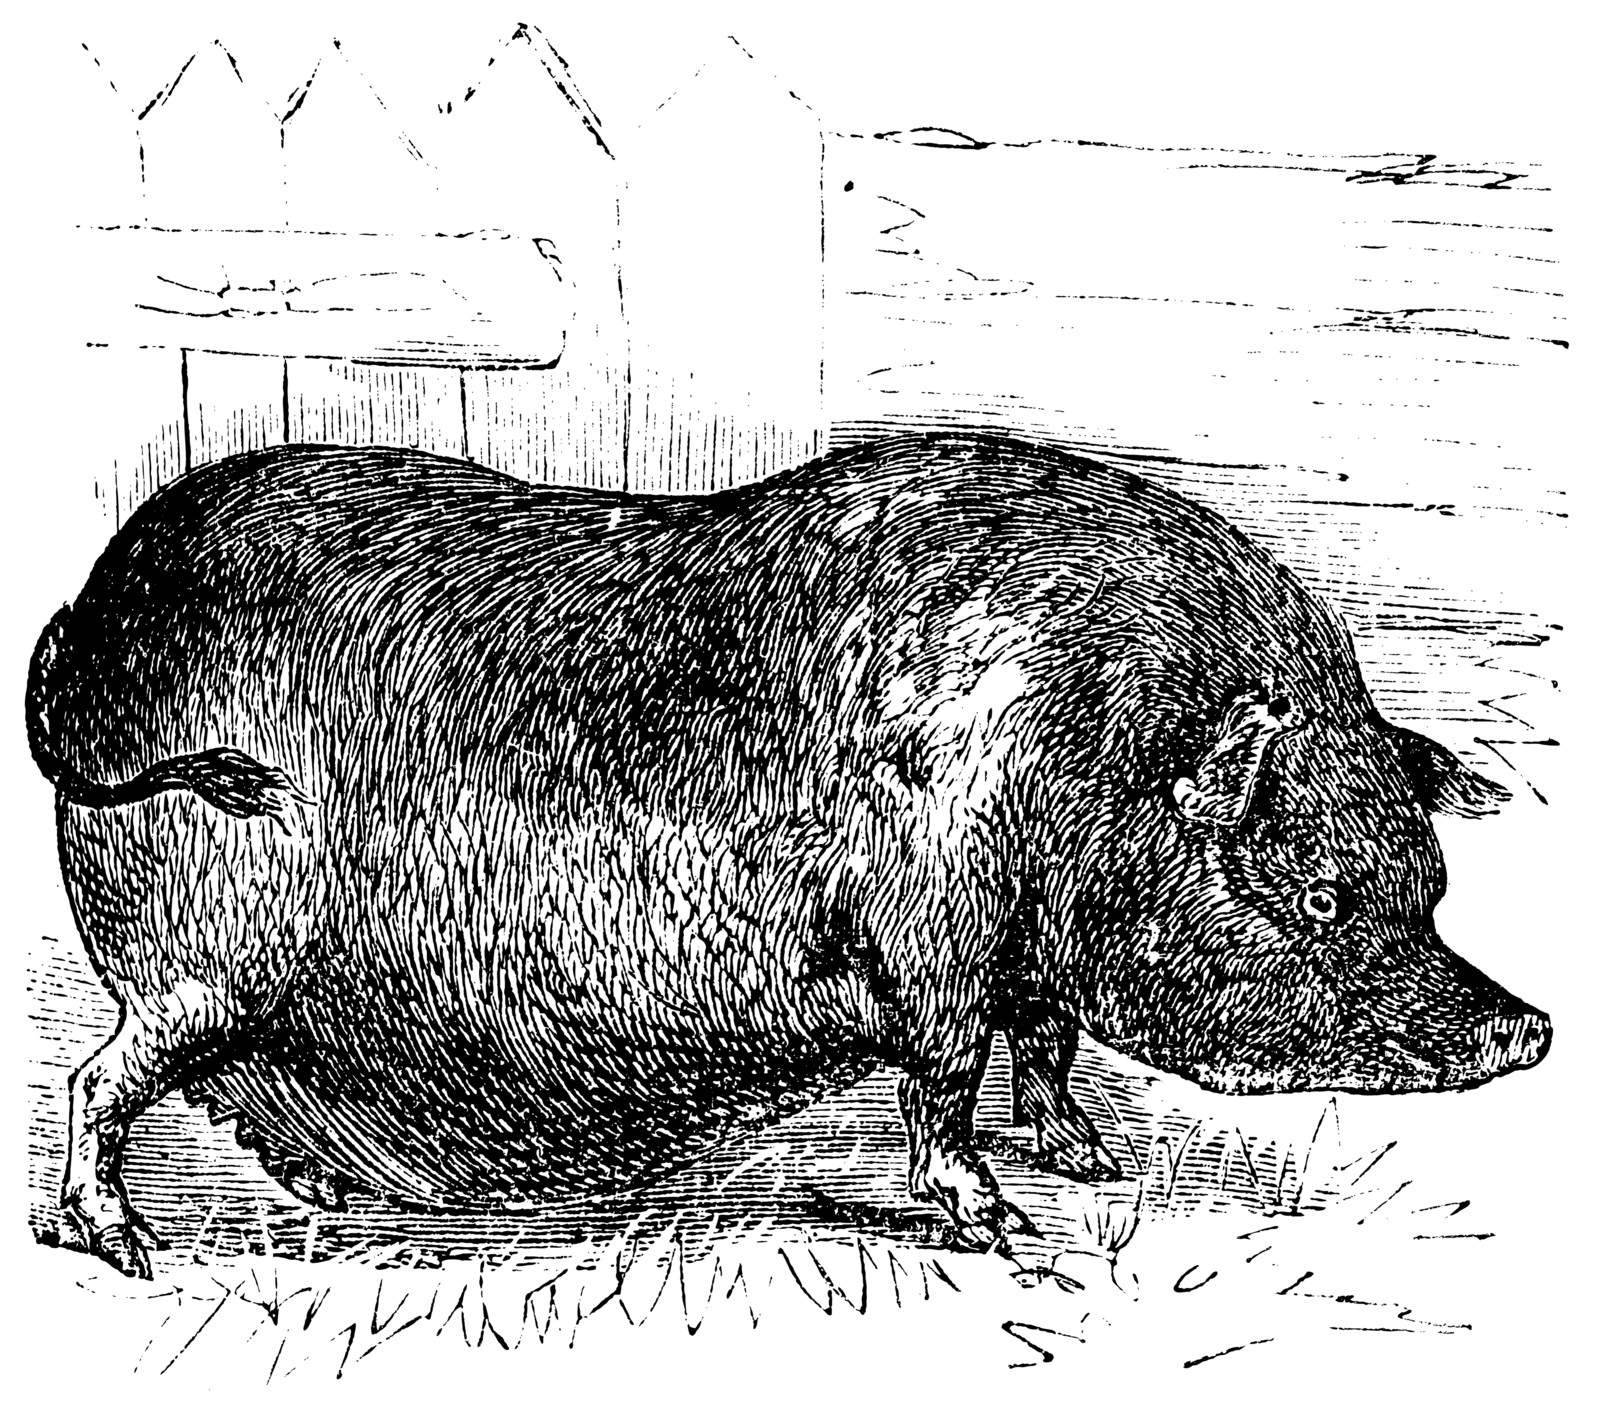 Heude's Pig or Indochinese Warty Pig or Vietnam Warty Pig or Sus bucculentus, vintage engraving. Old engraved illustration of a Heude's Pig.